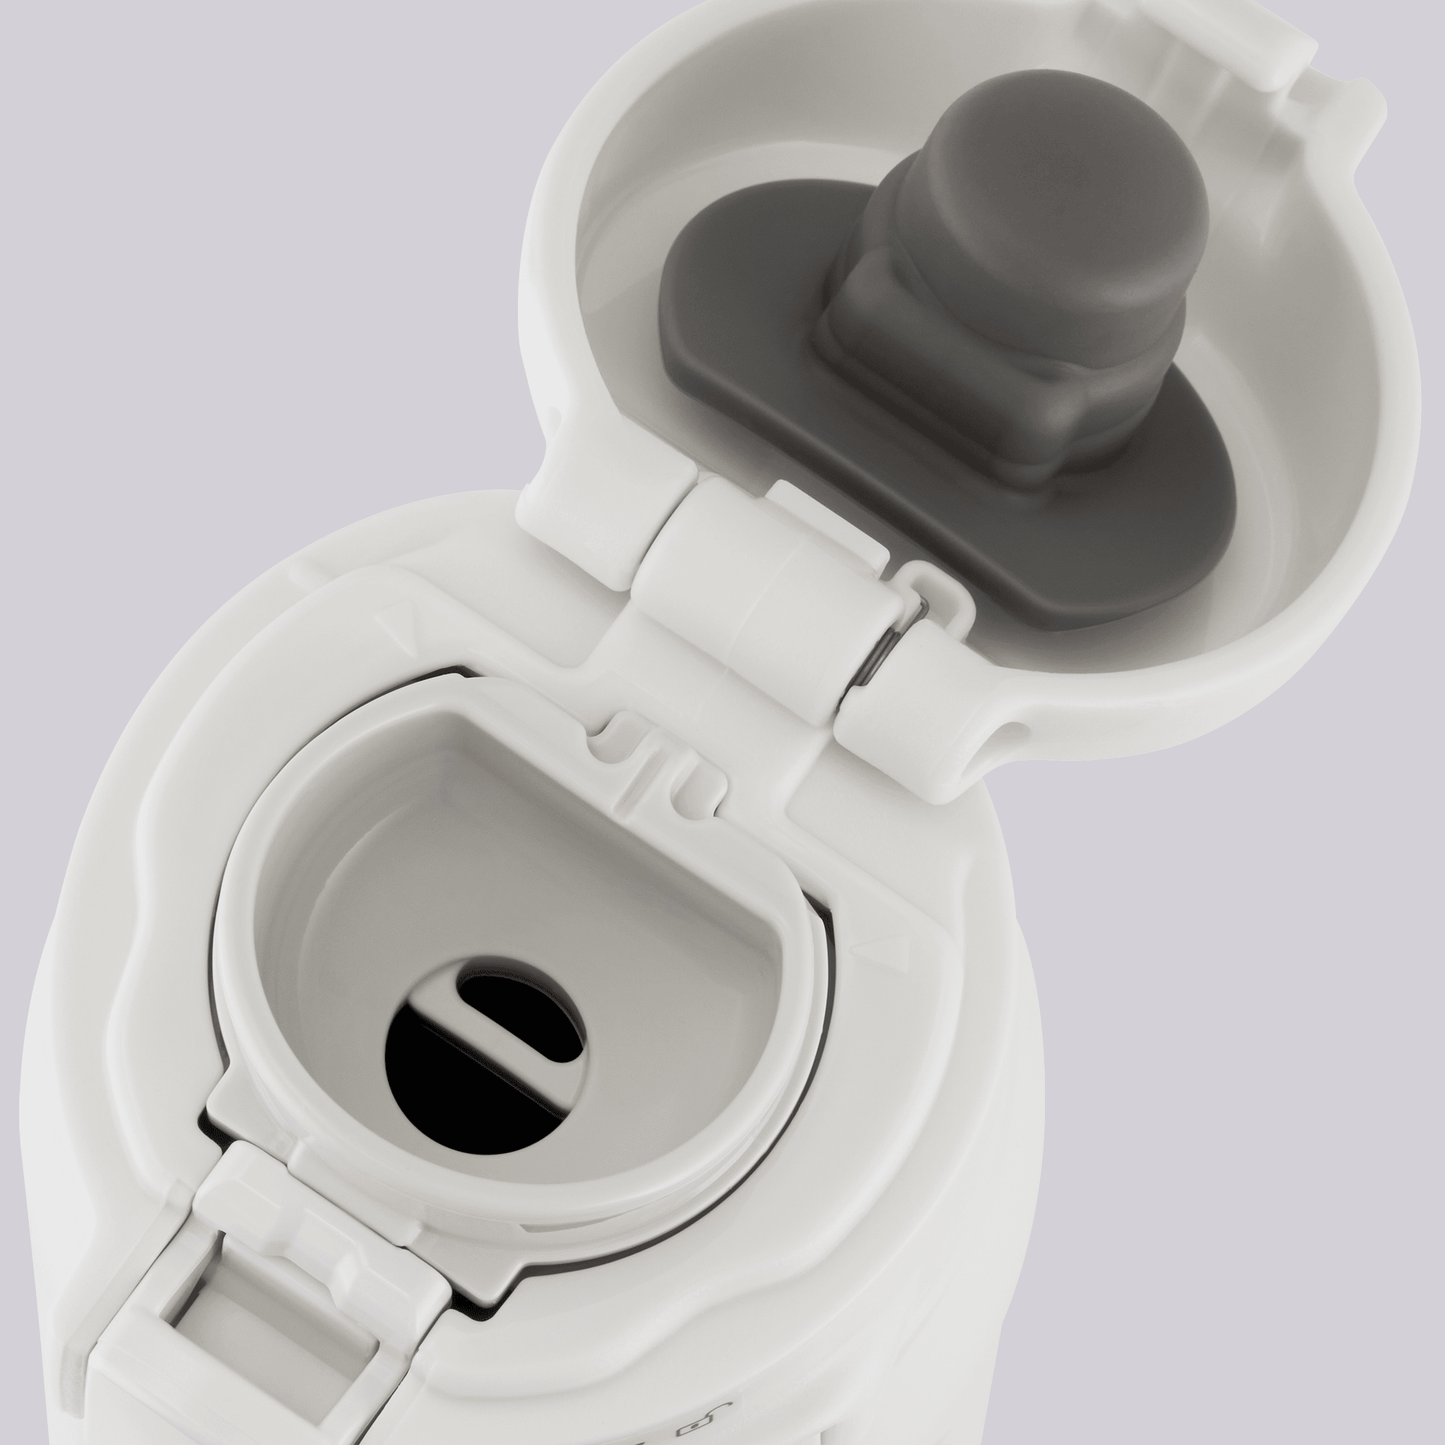 Air vent on the mouthpiece allows beverages to flow out smoothly, without gushing or overflowing